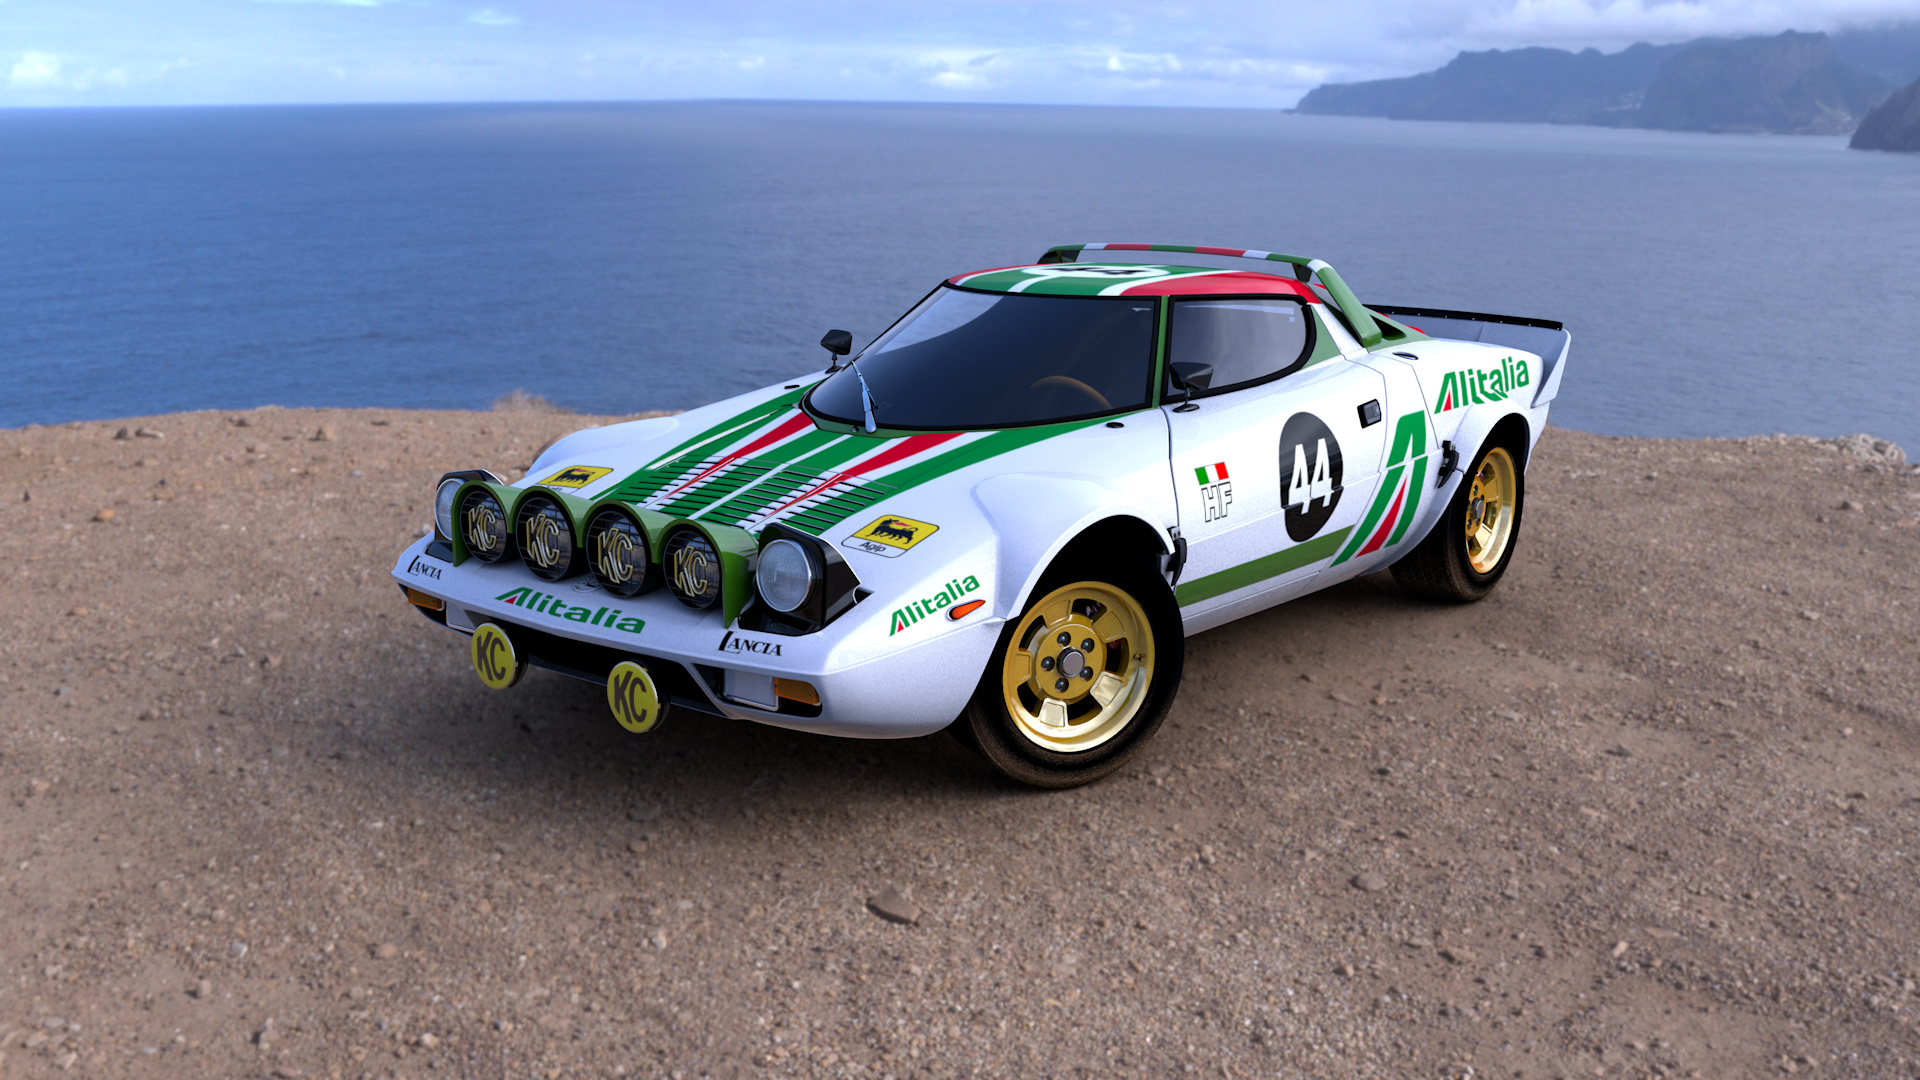 Lancia Stratos wallpapers, High-quality pictures, Automotive excellence, 1920x1080 Full HD Desktop